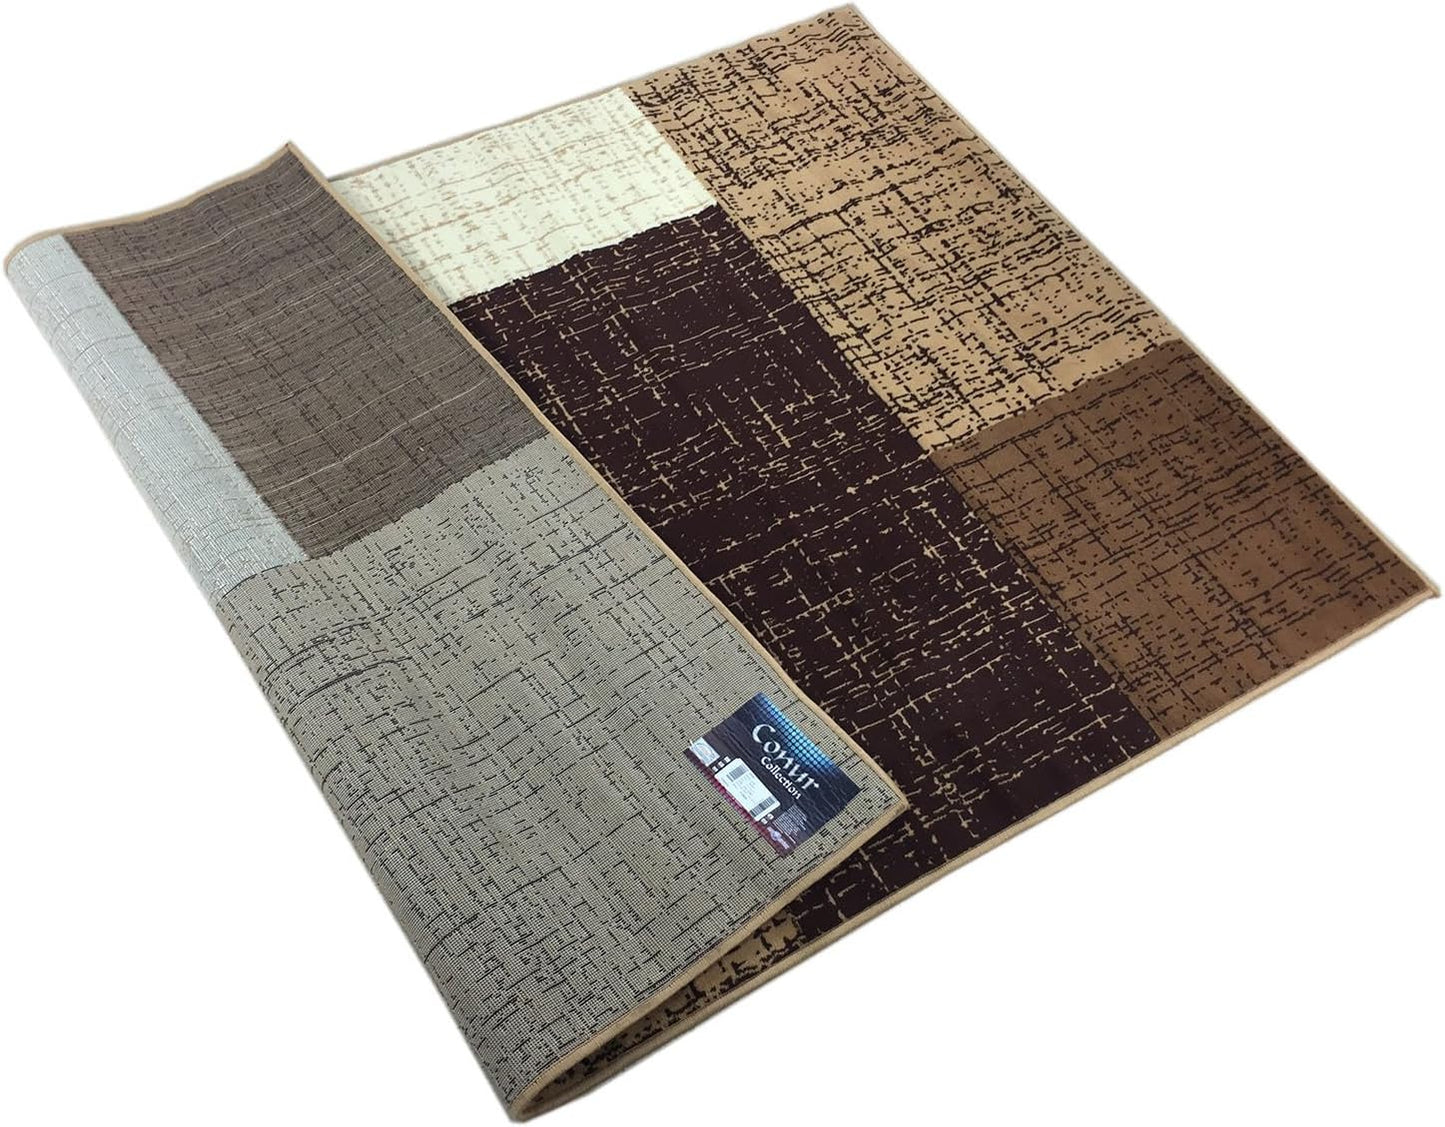 Conur Collection Squares Geometric Abstract Area Rug Rugs Modern Contemporary Area Rug 2 Color Options (Brown Beige , 4'11" x 6'11")